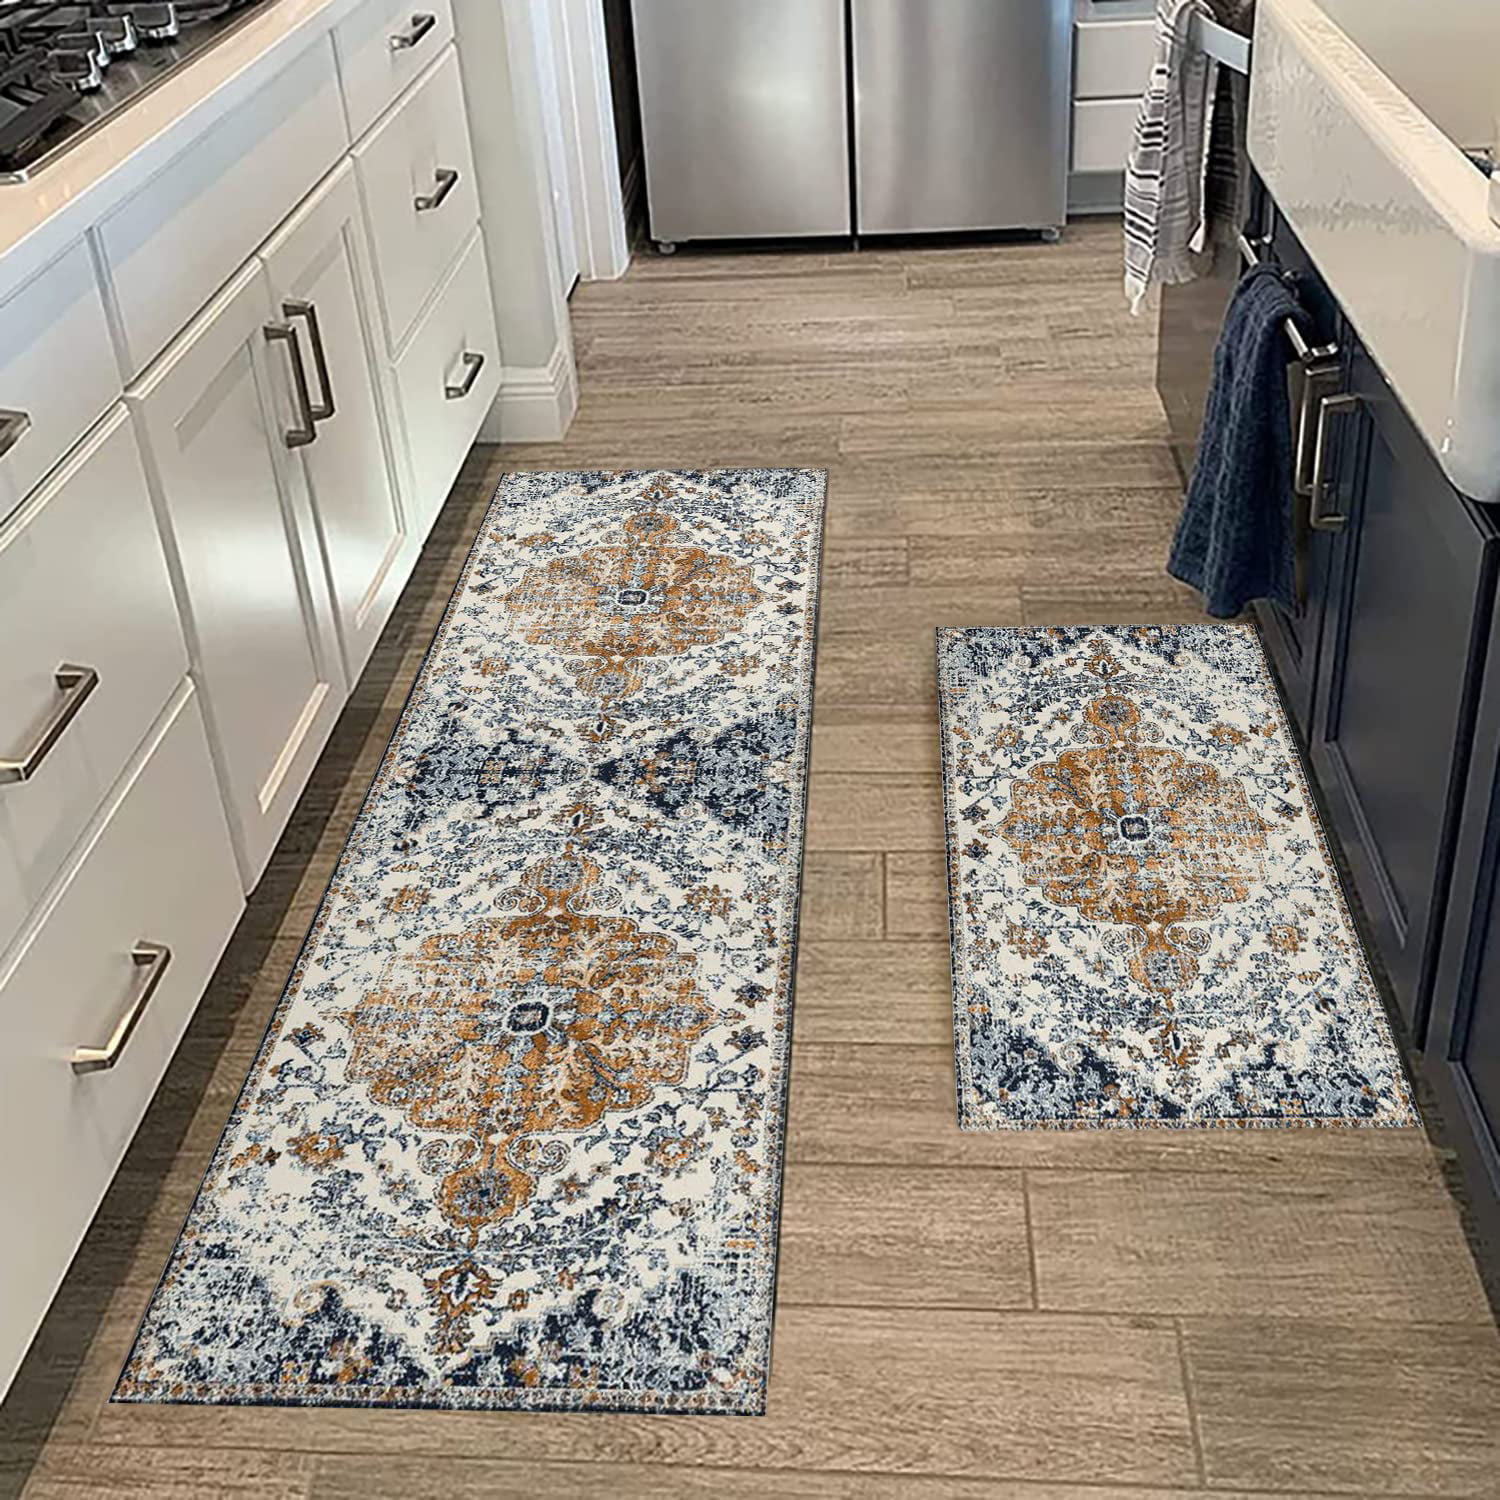 Modern Abstract Kitchen Mats for Floor, Blue Green Turquoise Teal Kitchen  Rugs Set of 2 Carpet Area Rug, Vintage Farmhouse Modern Kitchen Decor and  Accessories Stuff, 17x30 and 17x47 Inch 